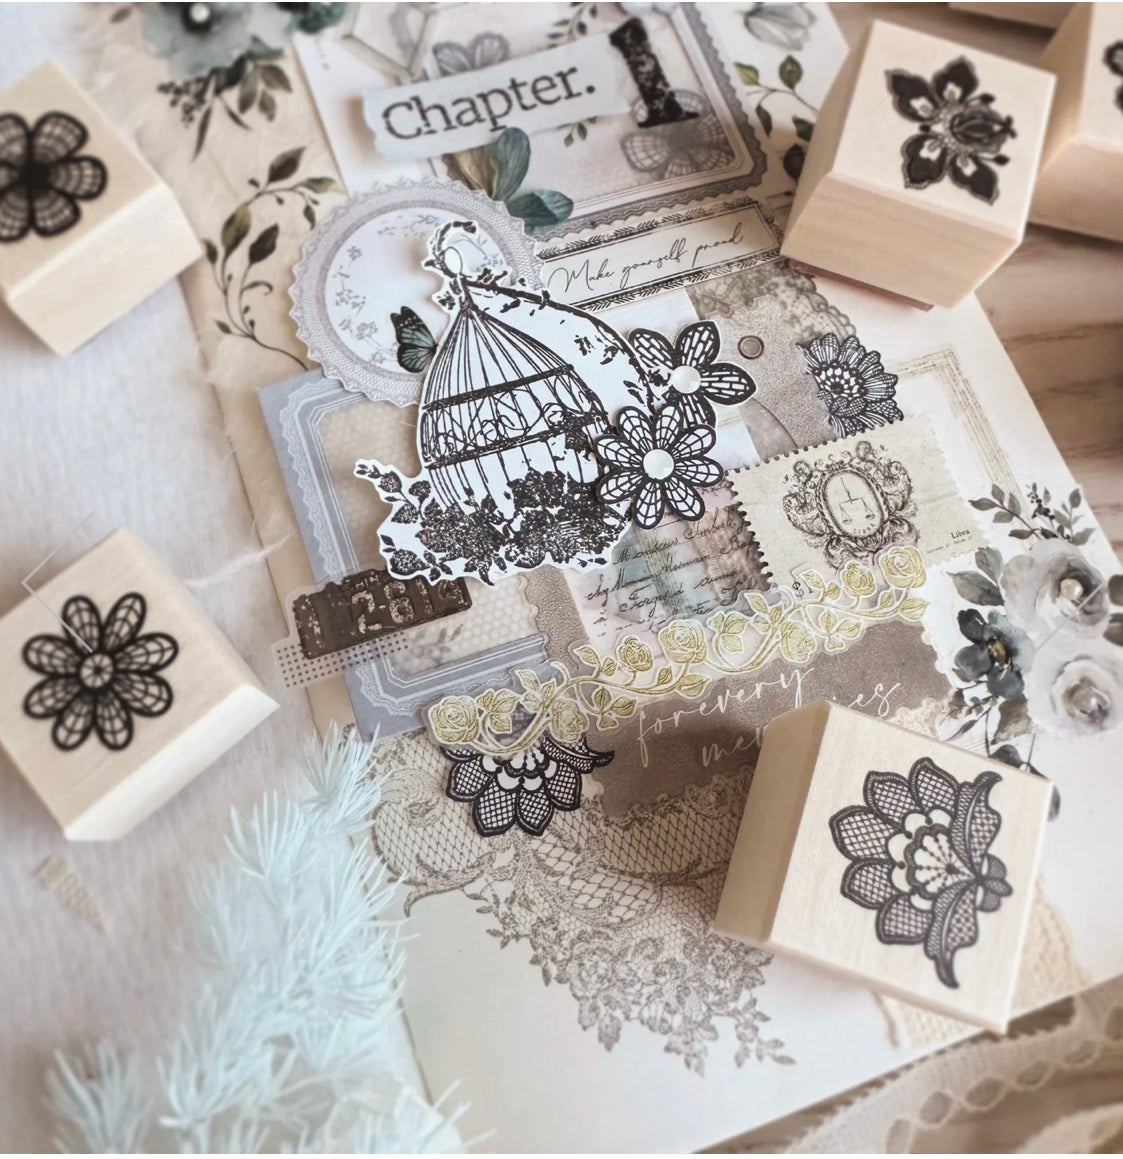 NEW! Journal Pages - Floral Sweet Lace | 9pcs Rubber Stamp Set